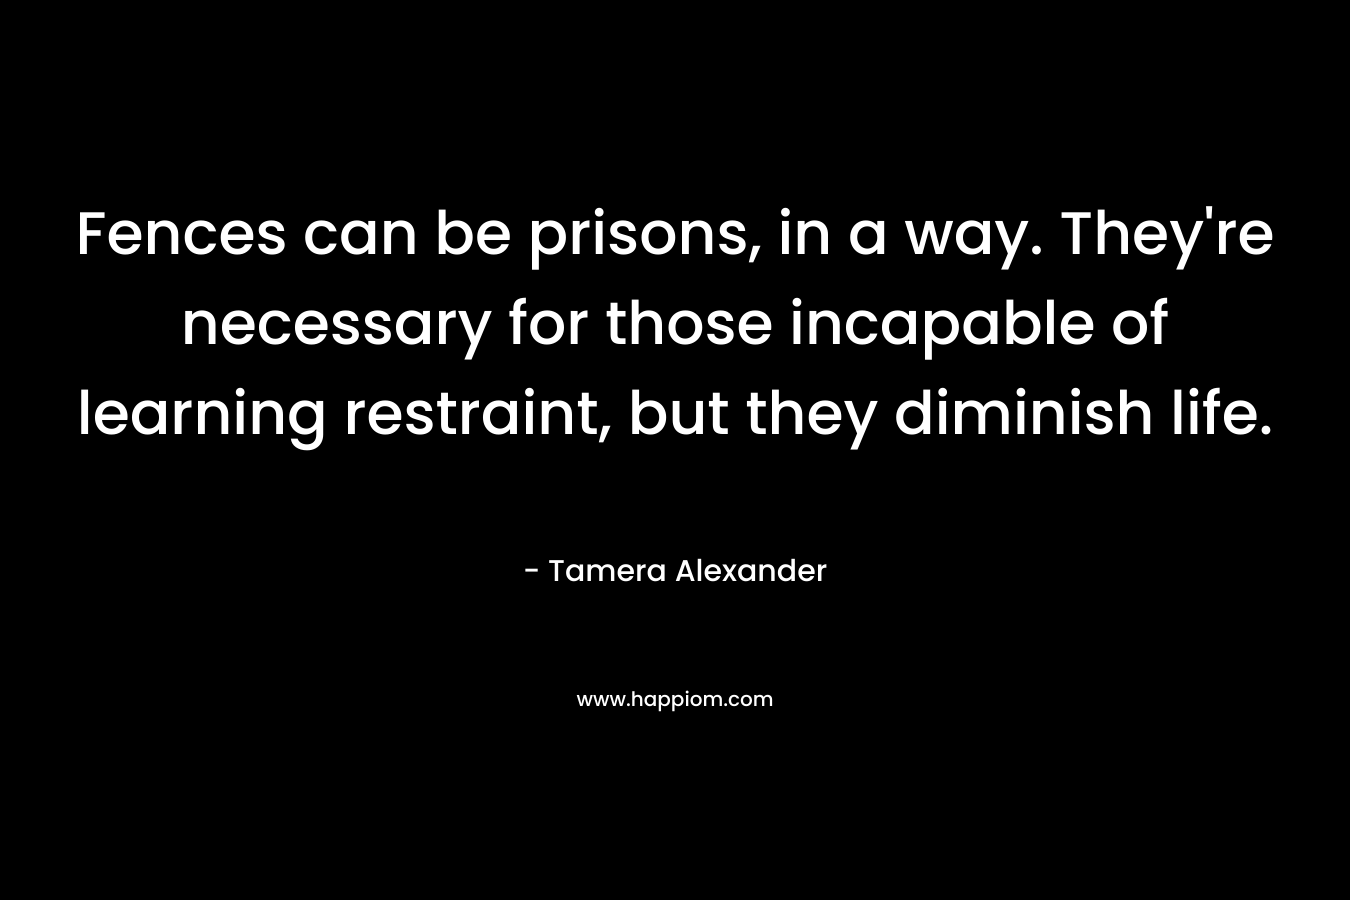 Fences can be prisons, in a way. They’re necessary for those incapable of learning restraint, but they diminish life. – Tamera Alexander